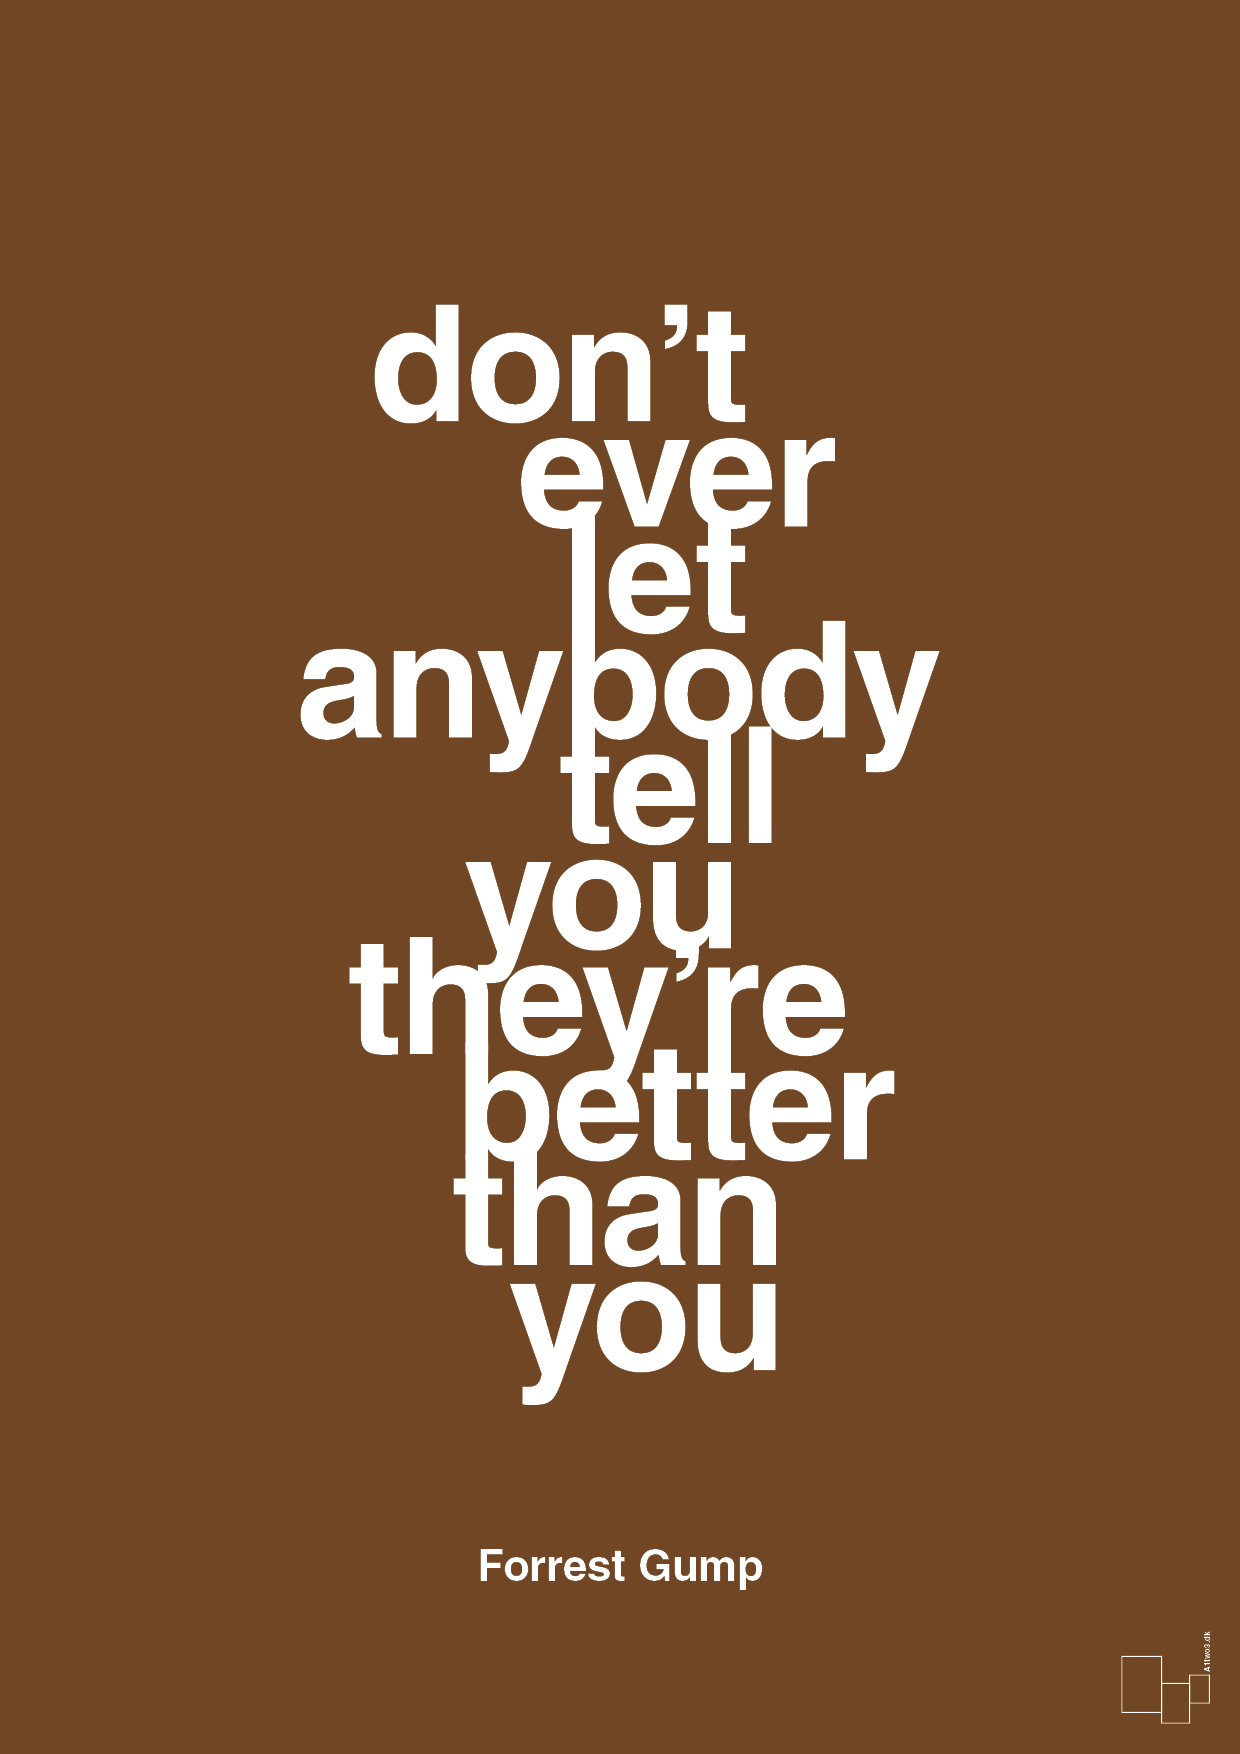 don’t ever let anybody tell you they’re better than you - Plakat med Citater i Dark Brown